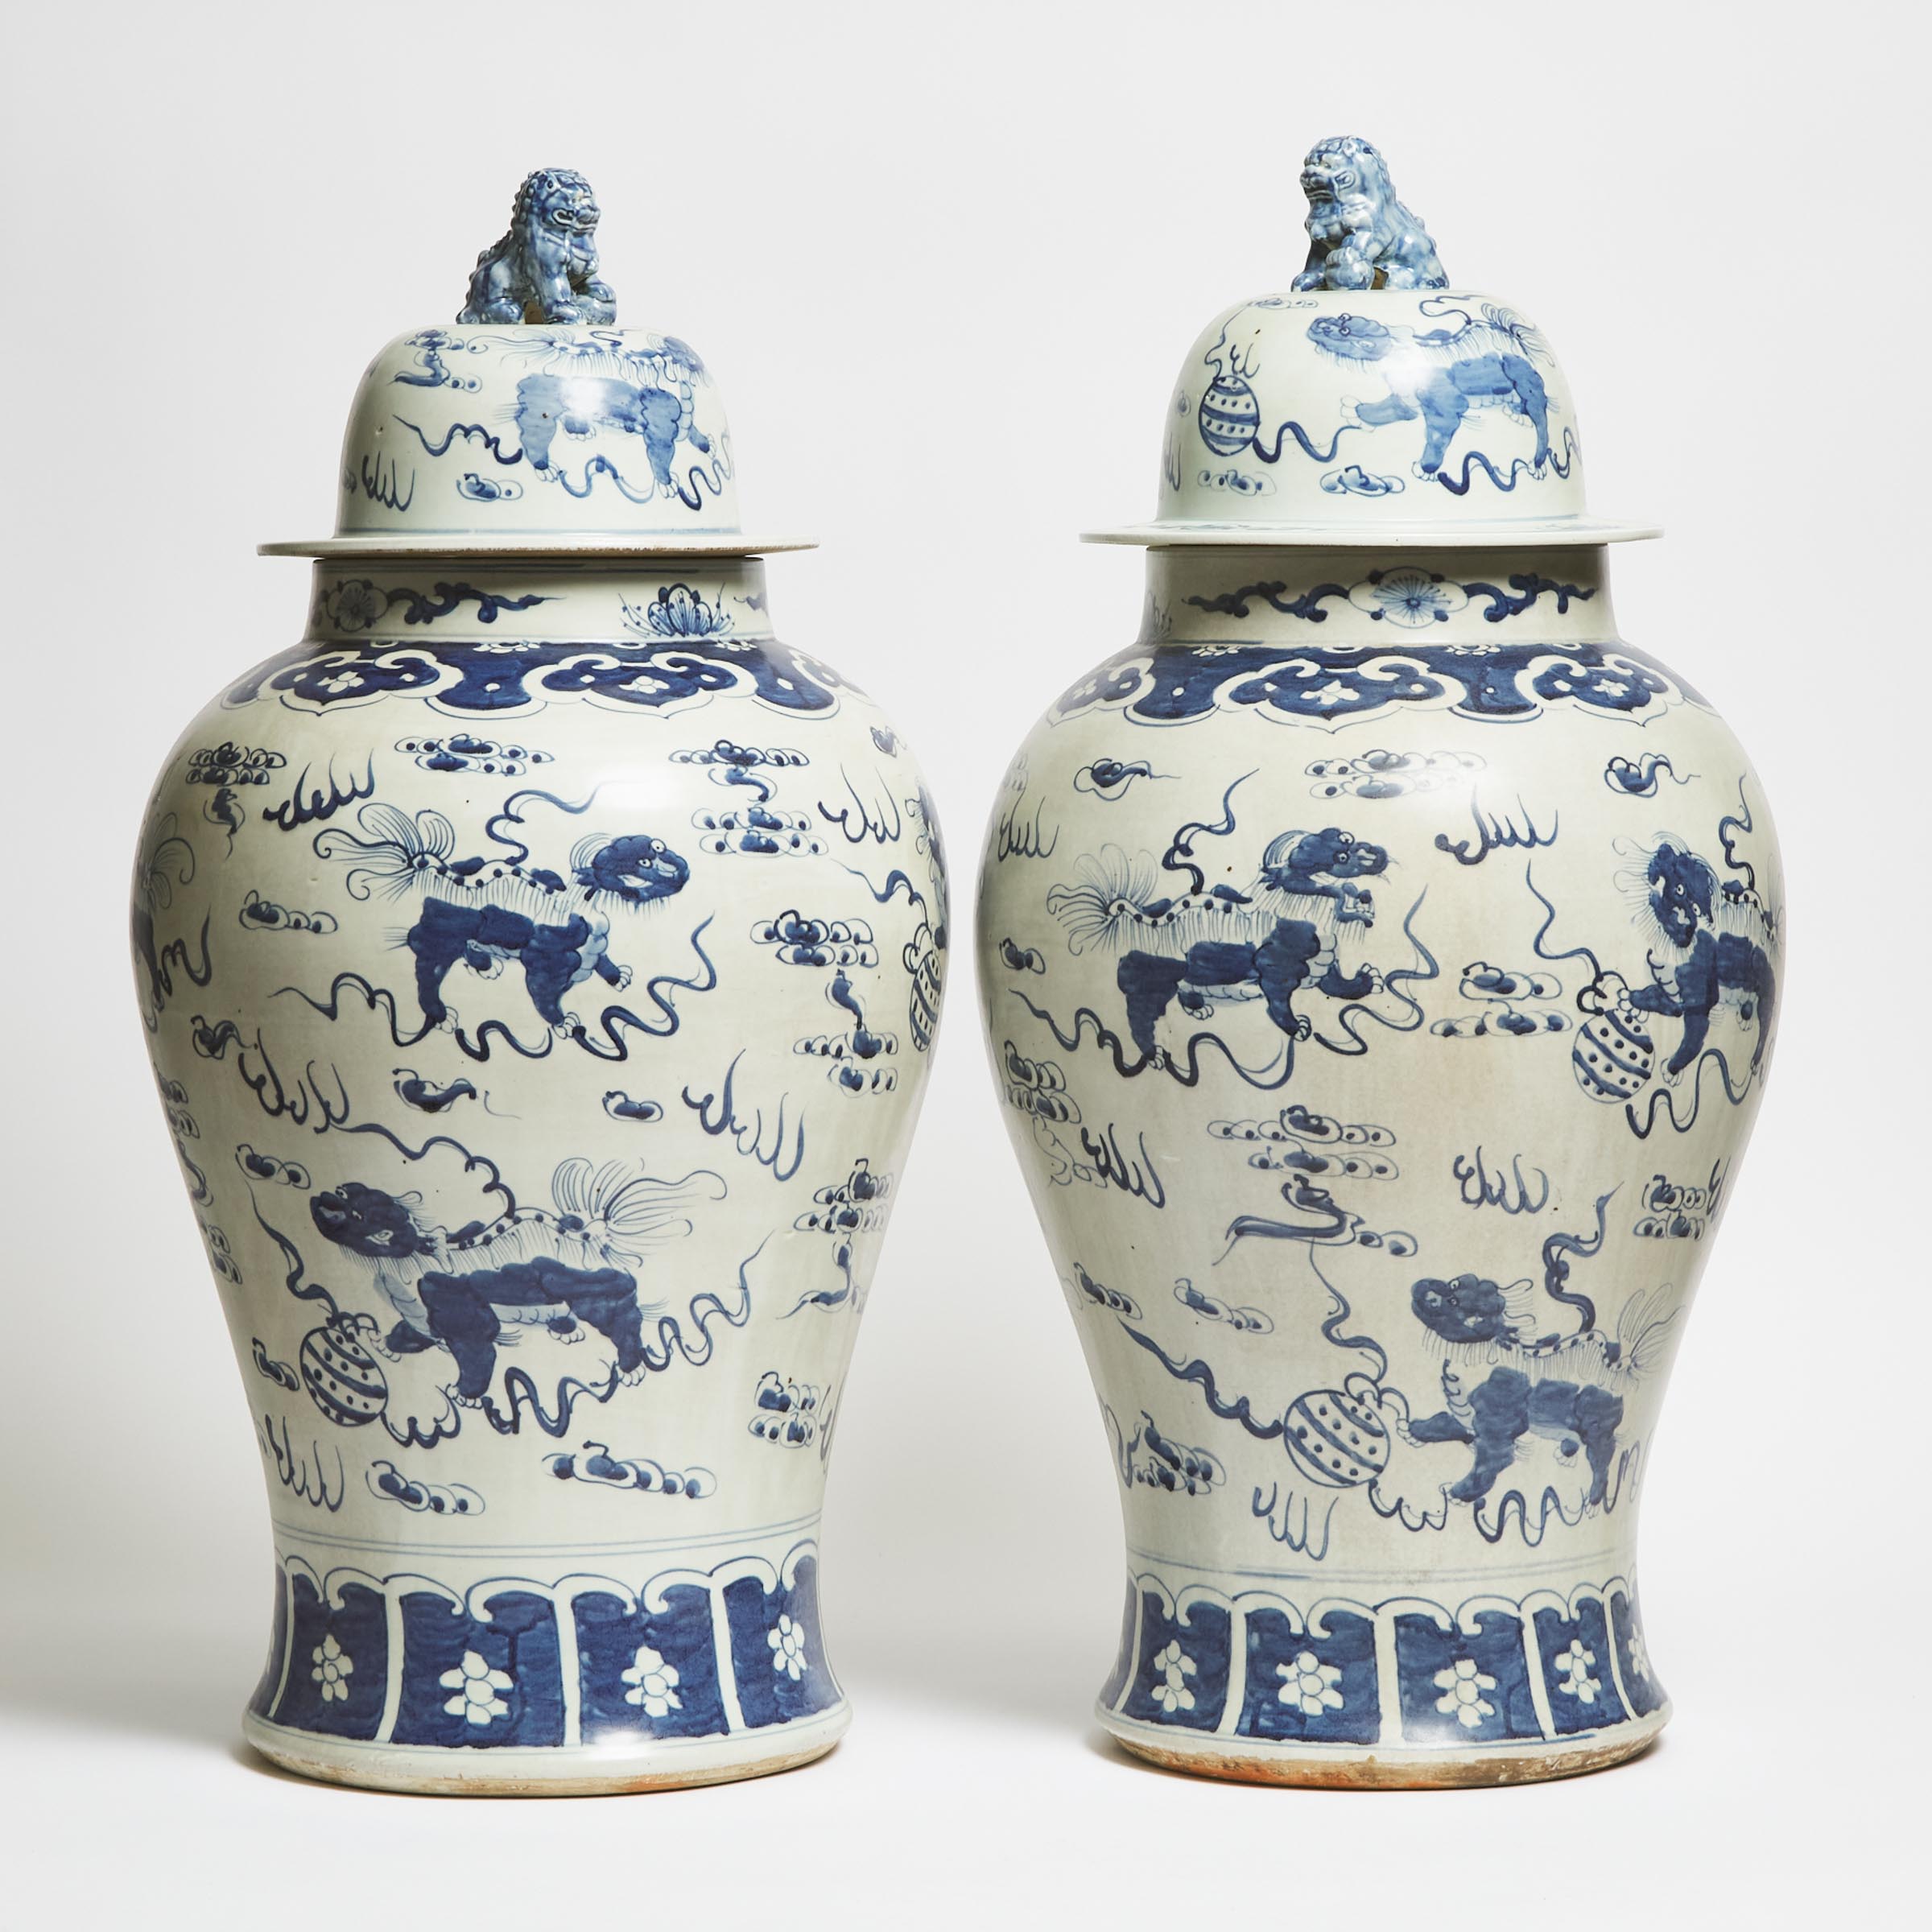 A Pair of Large Ming-Style Blue and White 'Buddhist Lion' Vases and Covers, First Half of 20th Century